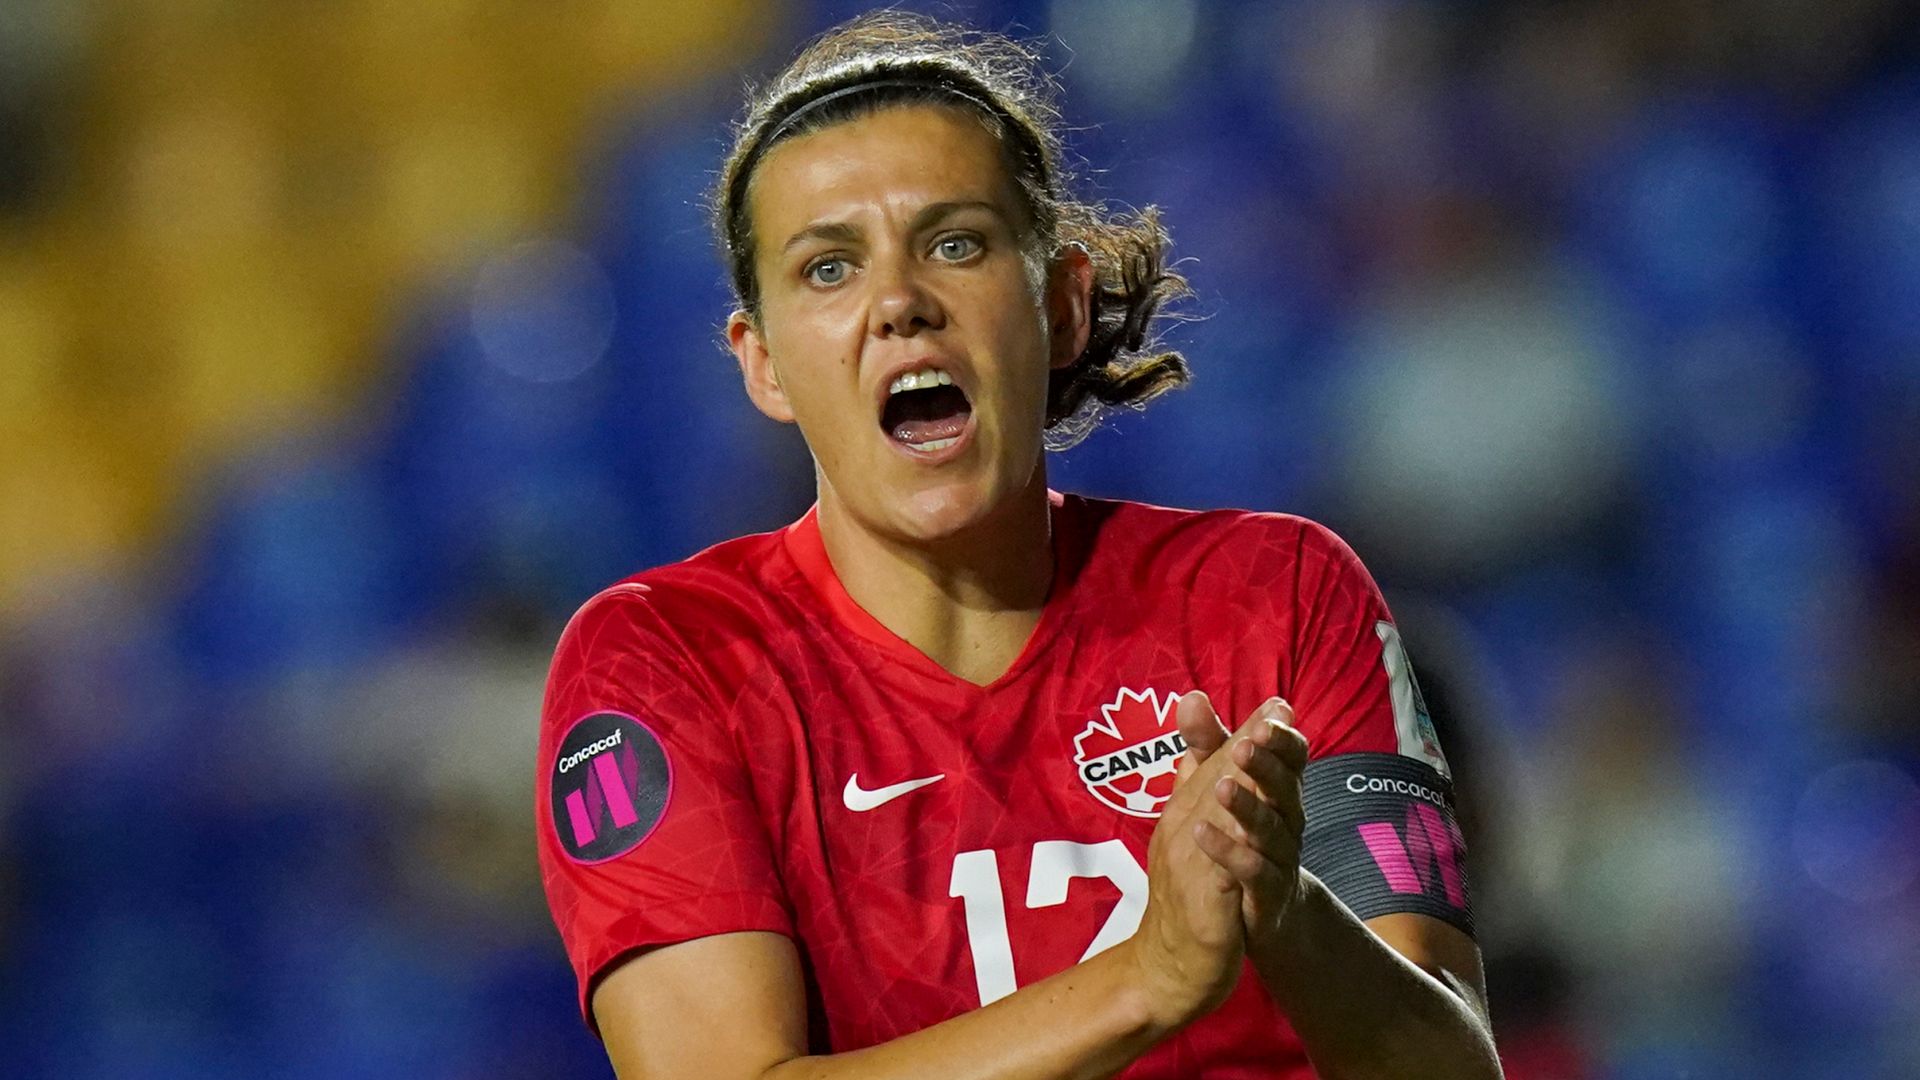 Canada women's team to strike over pay | 'Outraged is an understatement'